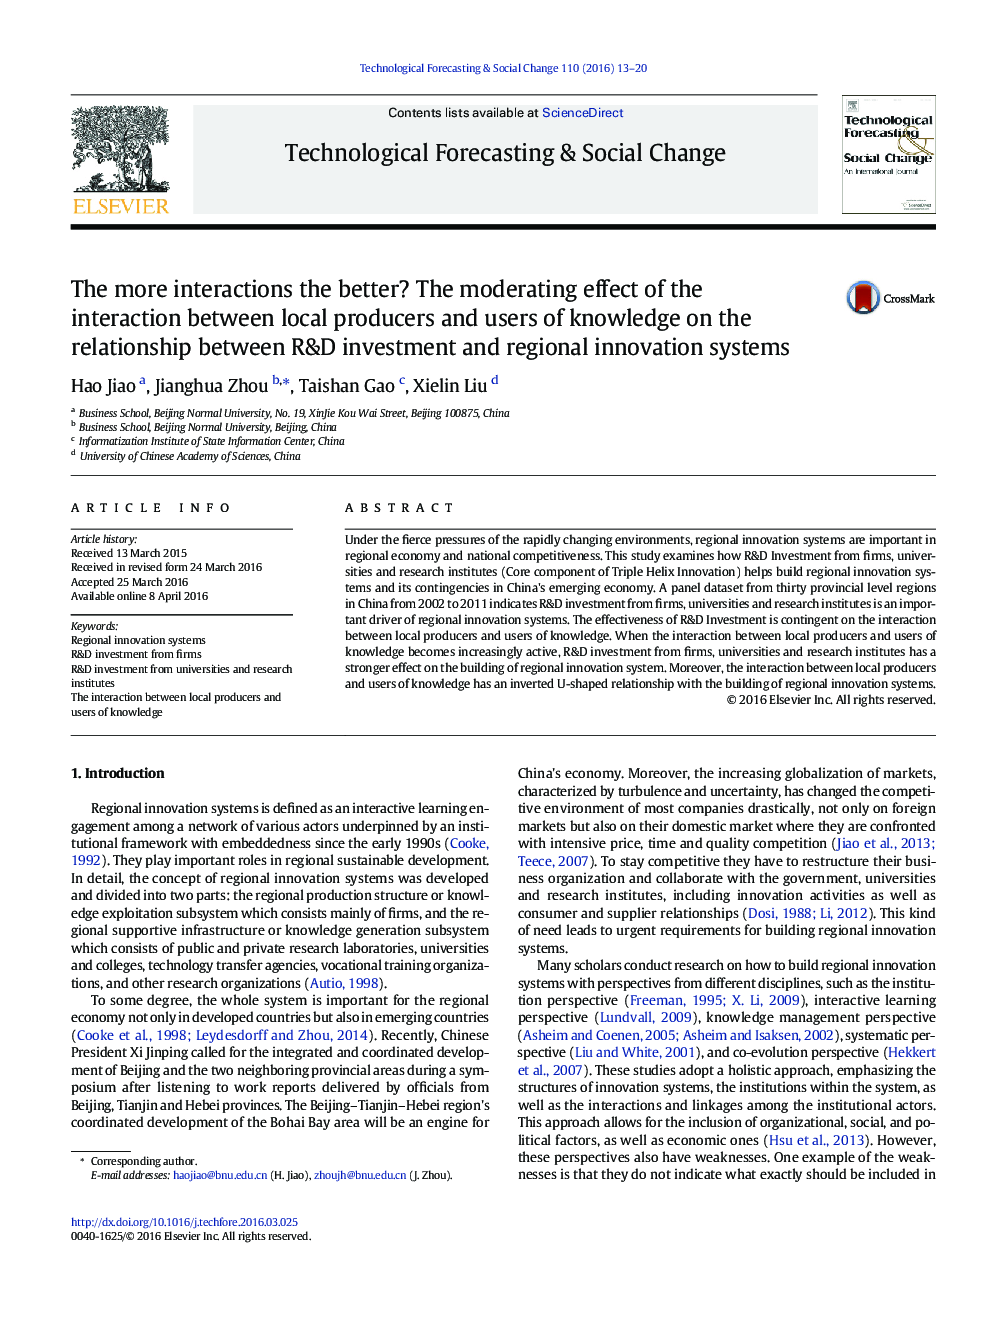 The more interactions the better? The moderating effect of the interaction between local producers and users of knowledge on the relationship between R&D investment and regional innovation systems